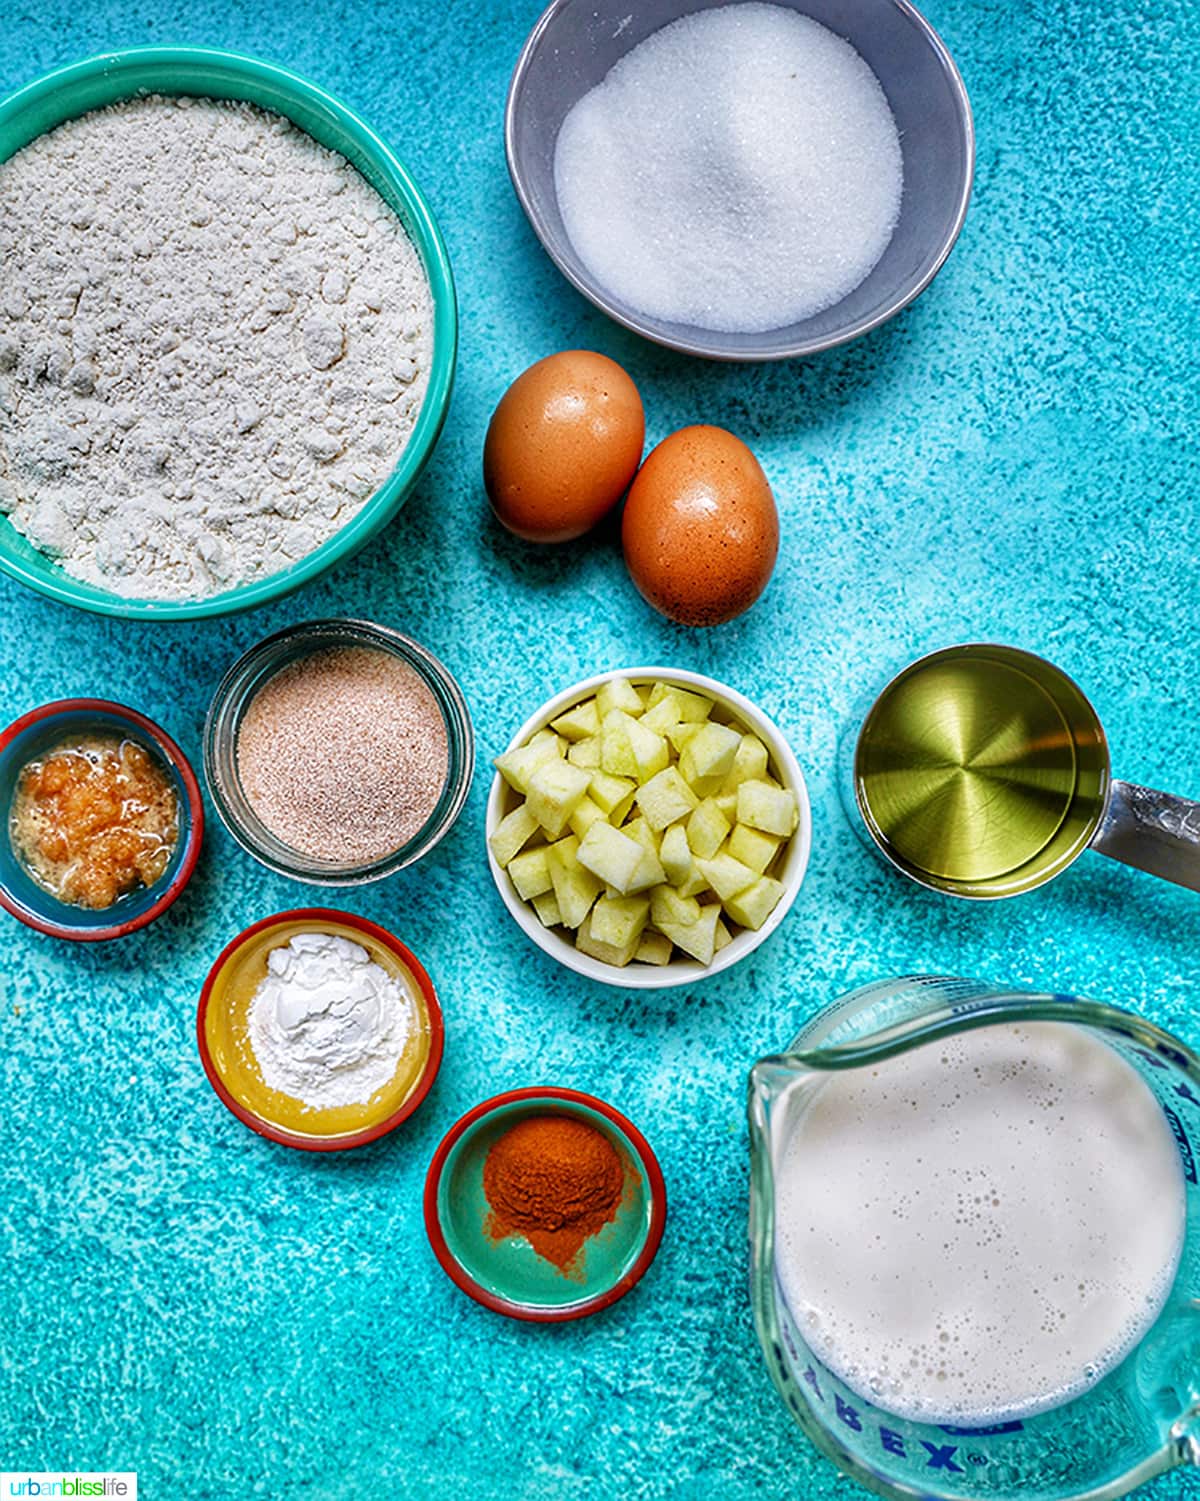 ingredients to make apple cinnamon pancakes on a blue table.